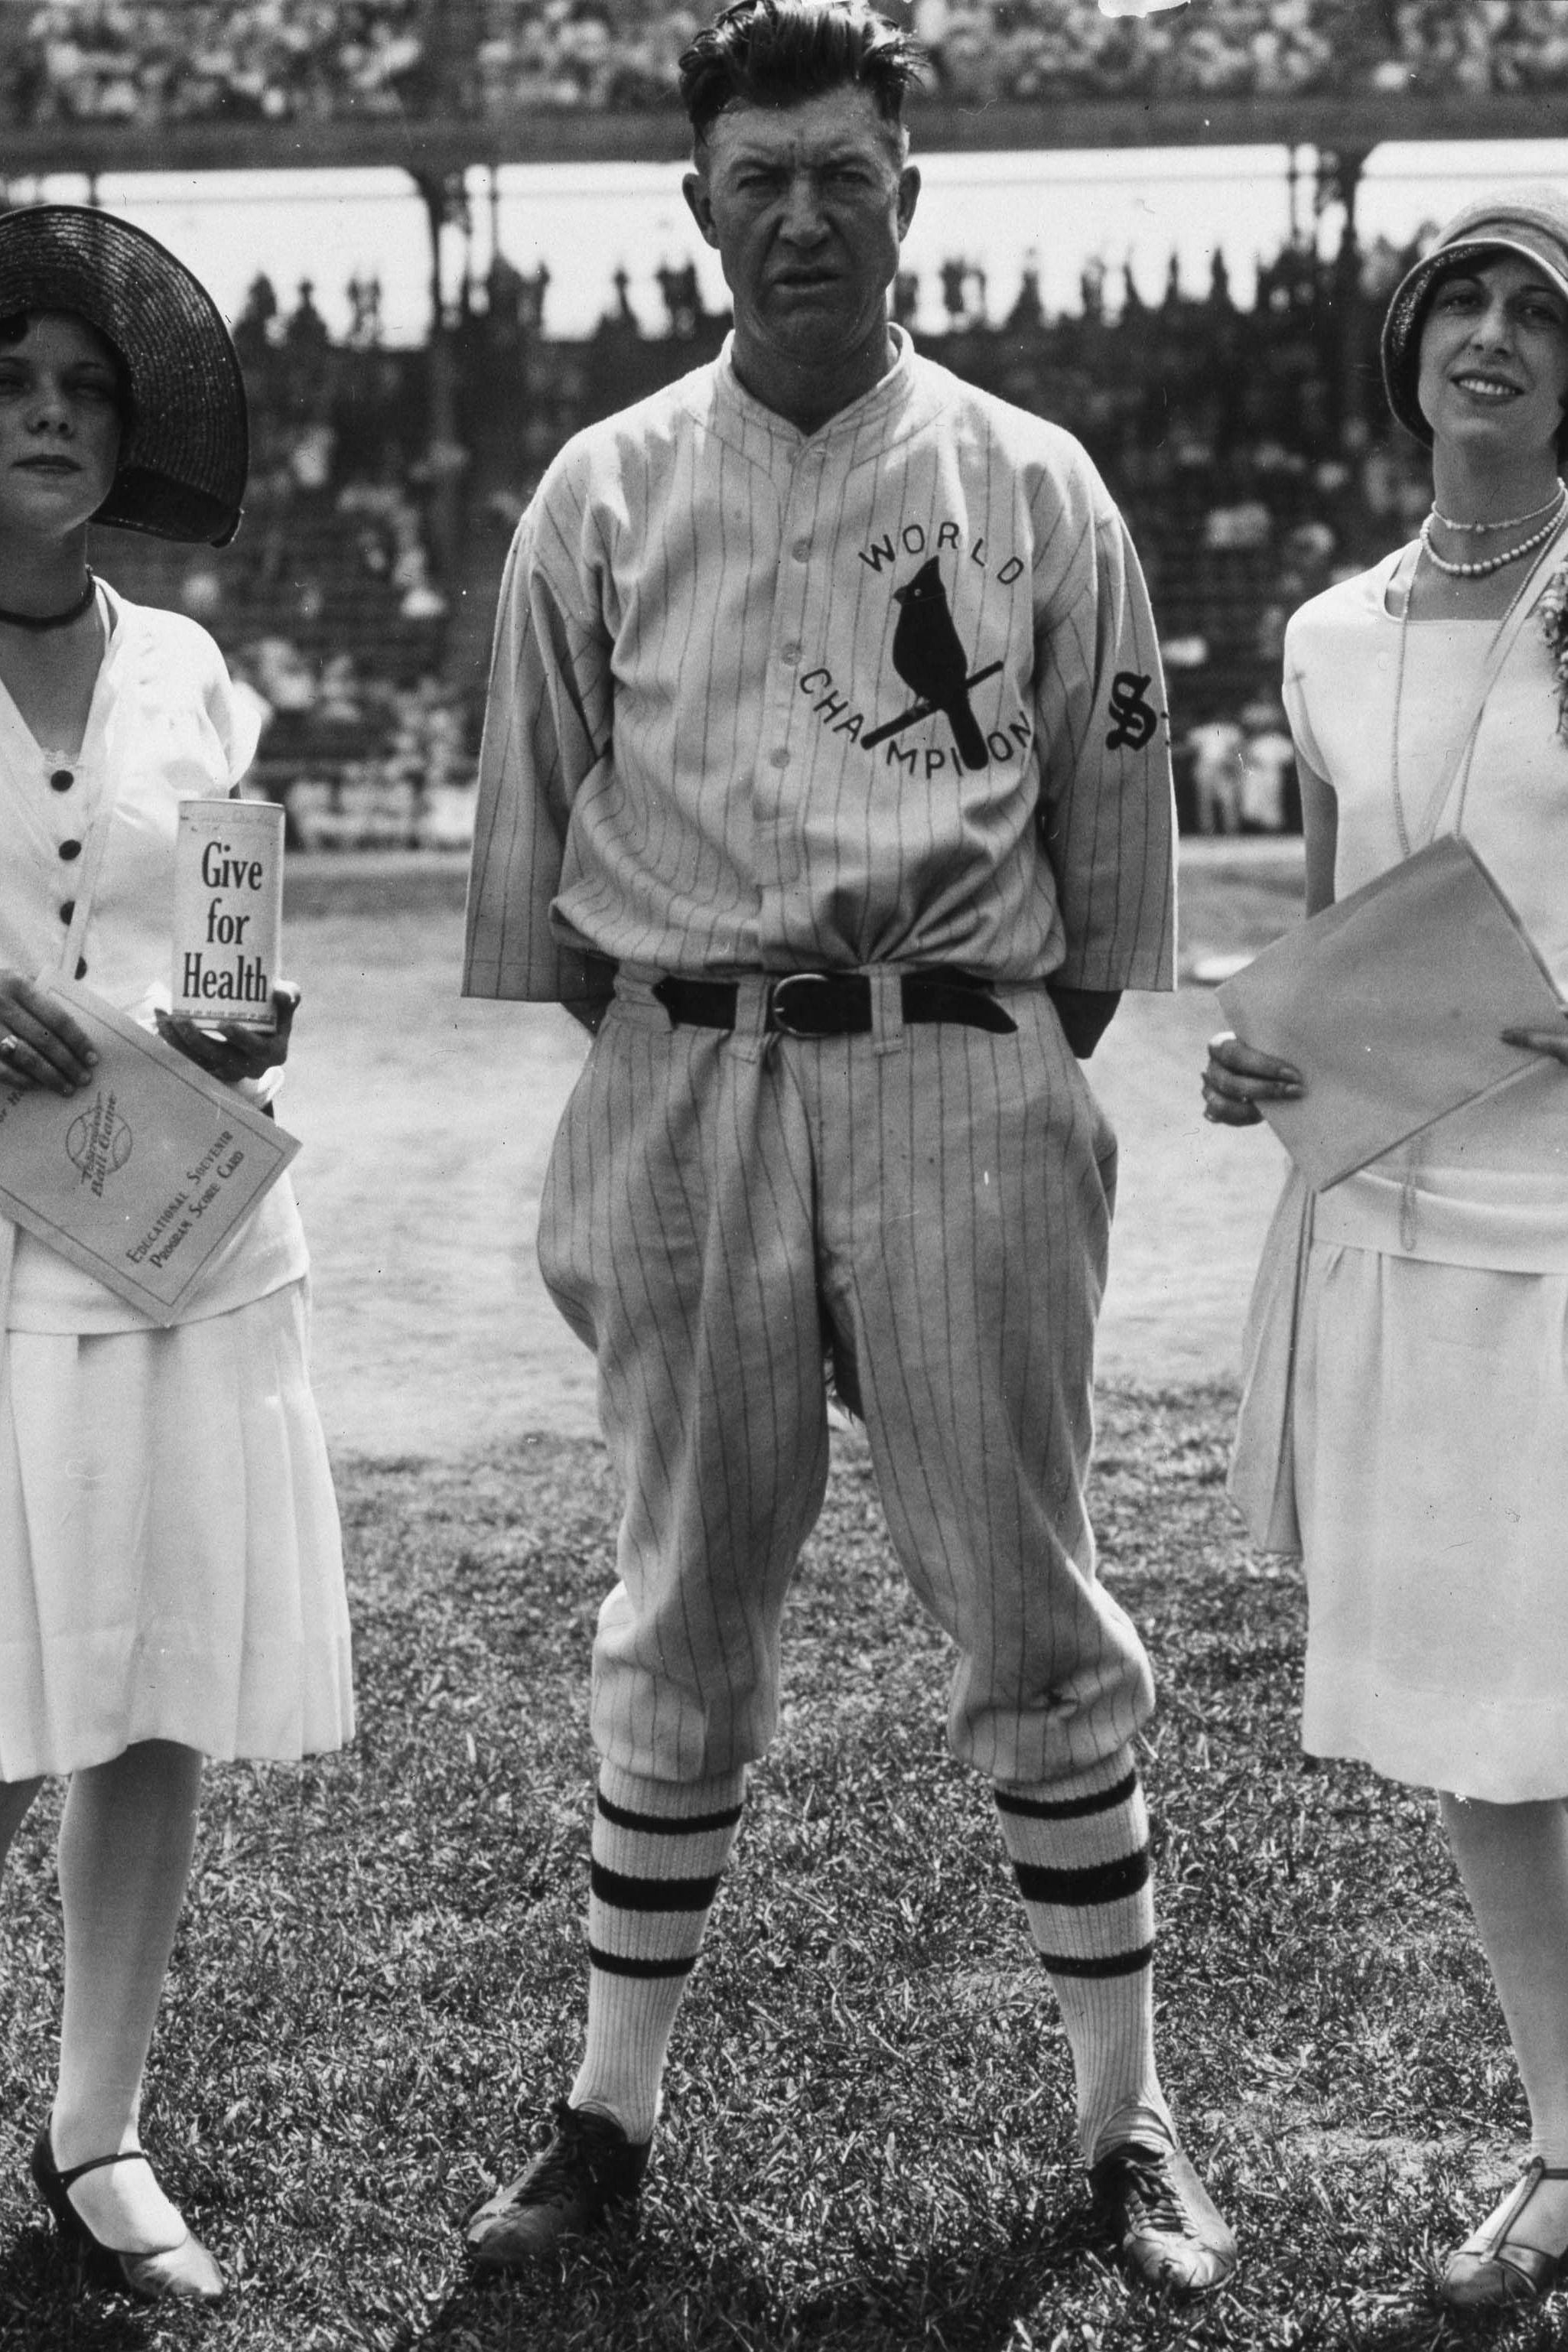 The Cardinals throw back to their 1927 'World Champions' uniforms